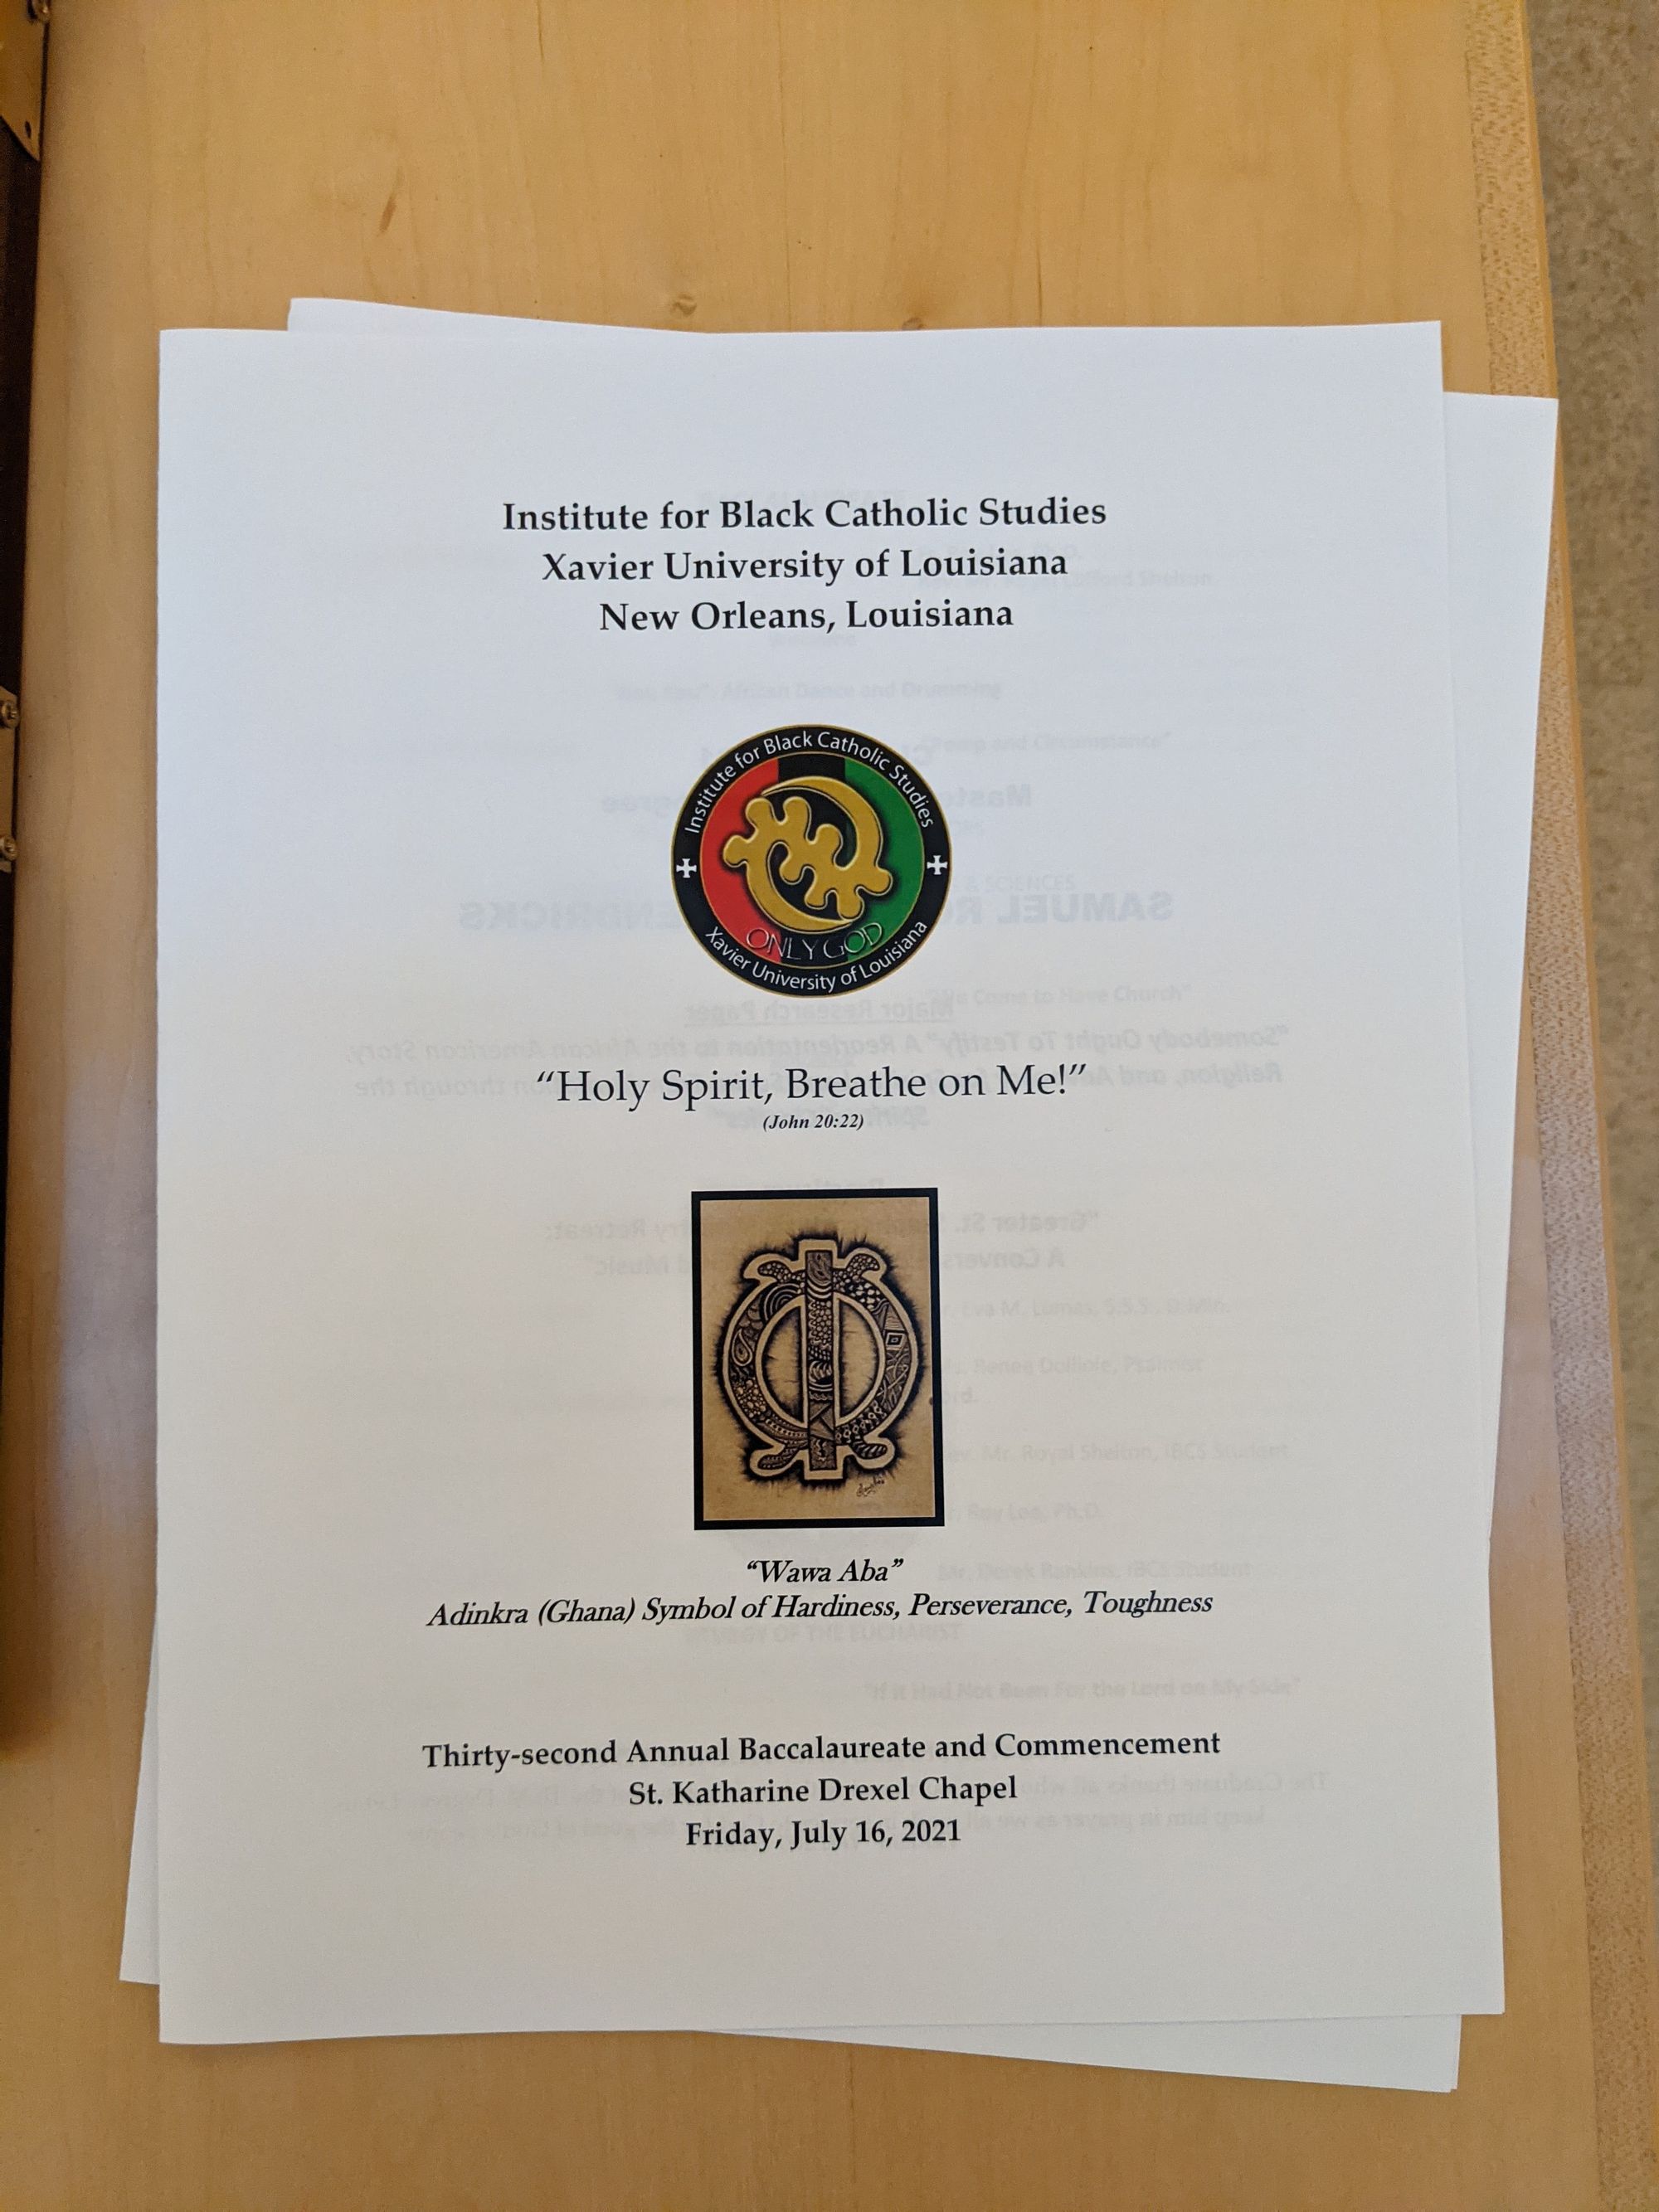 XULA's Insitute for Black Catholic Studies completes 42nd annual session